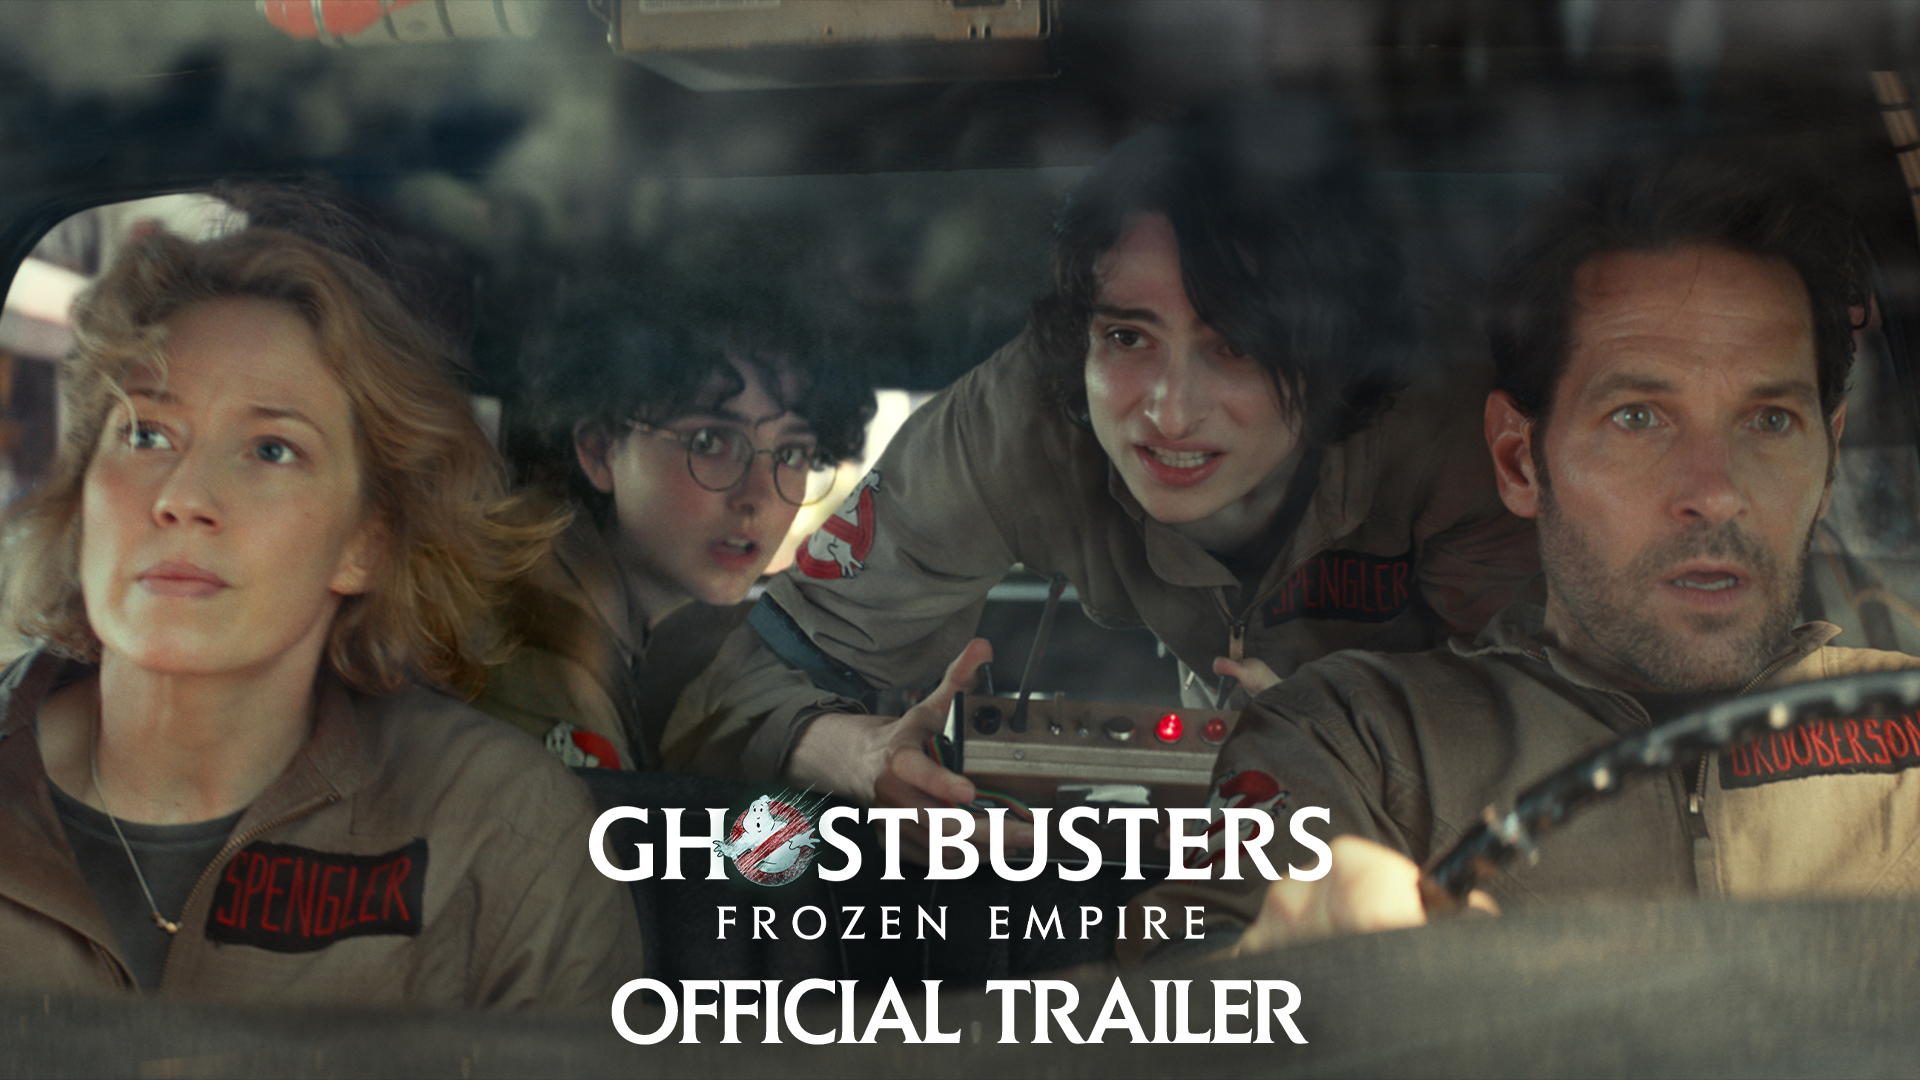 teaser image - Ghostbusters: Frozen Empire Official Trailer